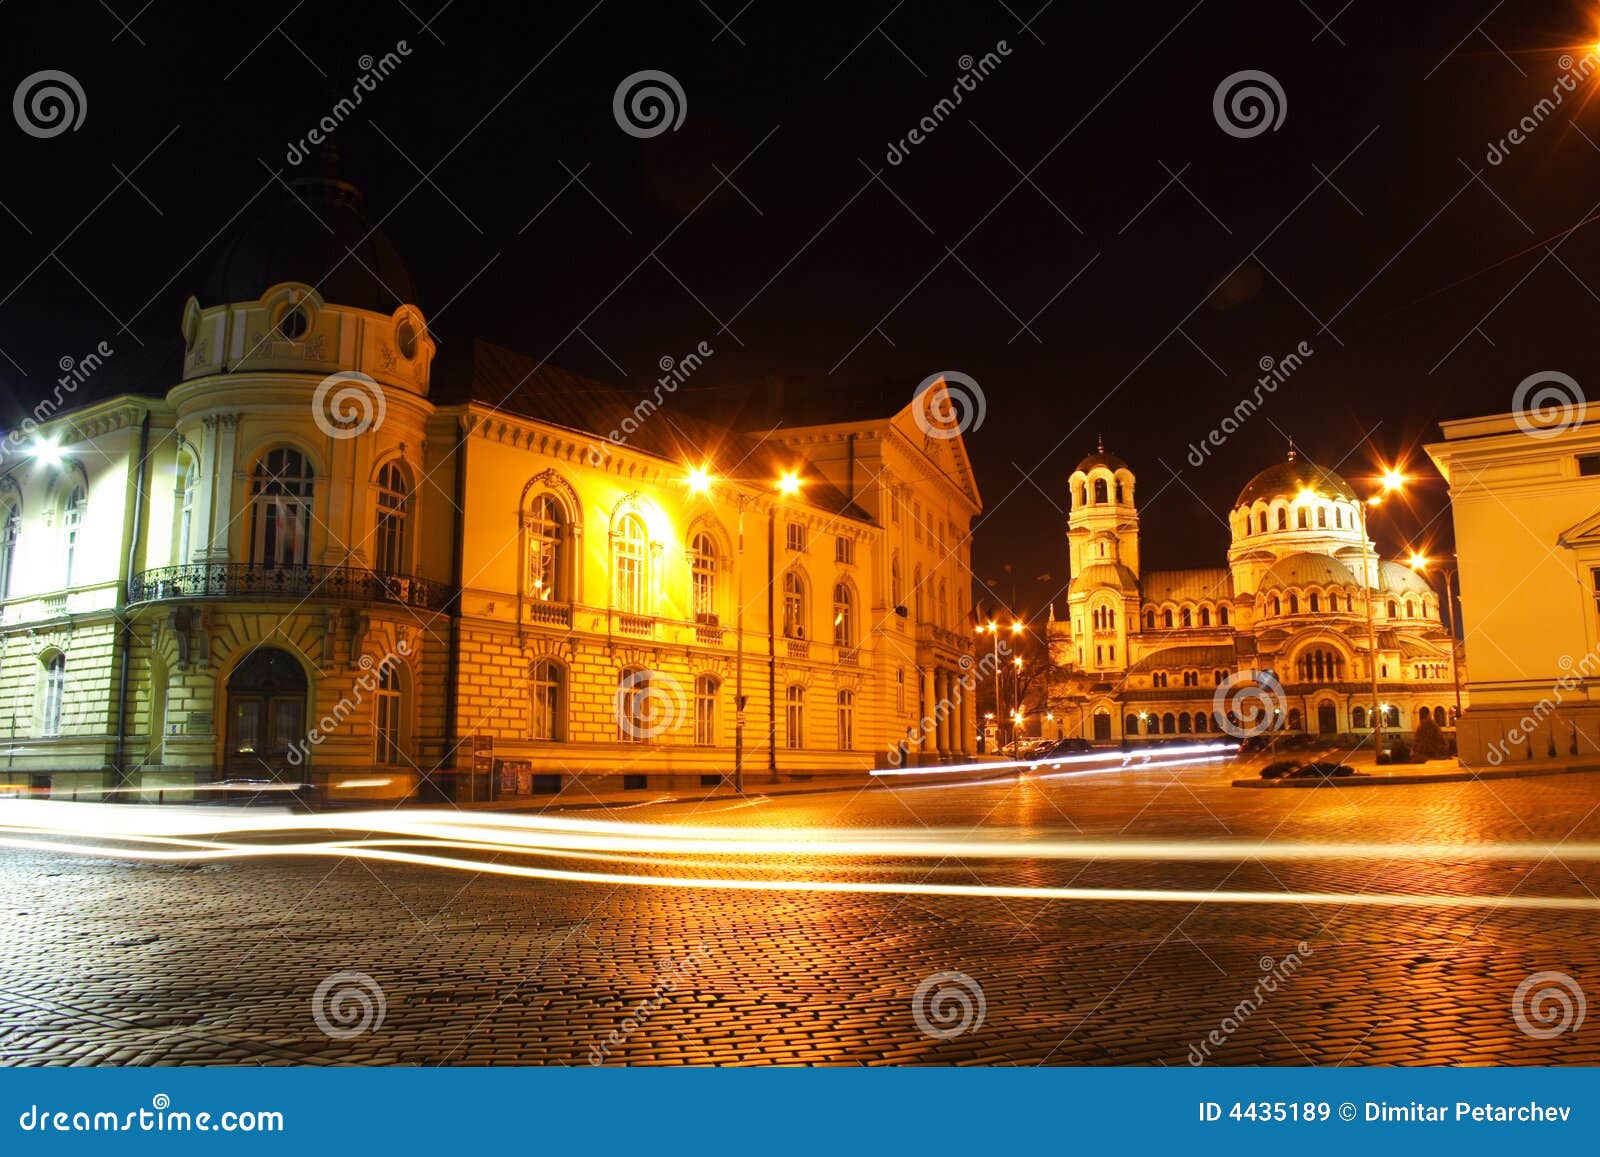 the center of sofia, bulgaria by night